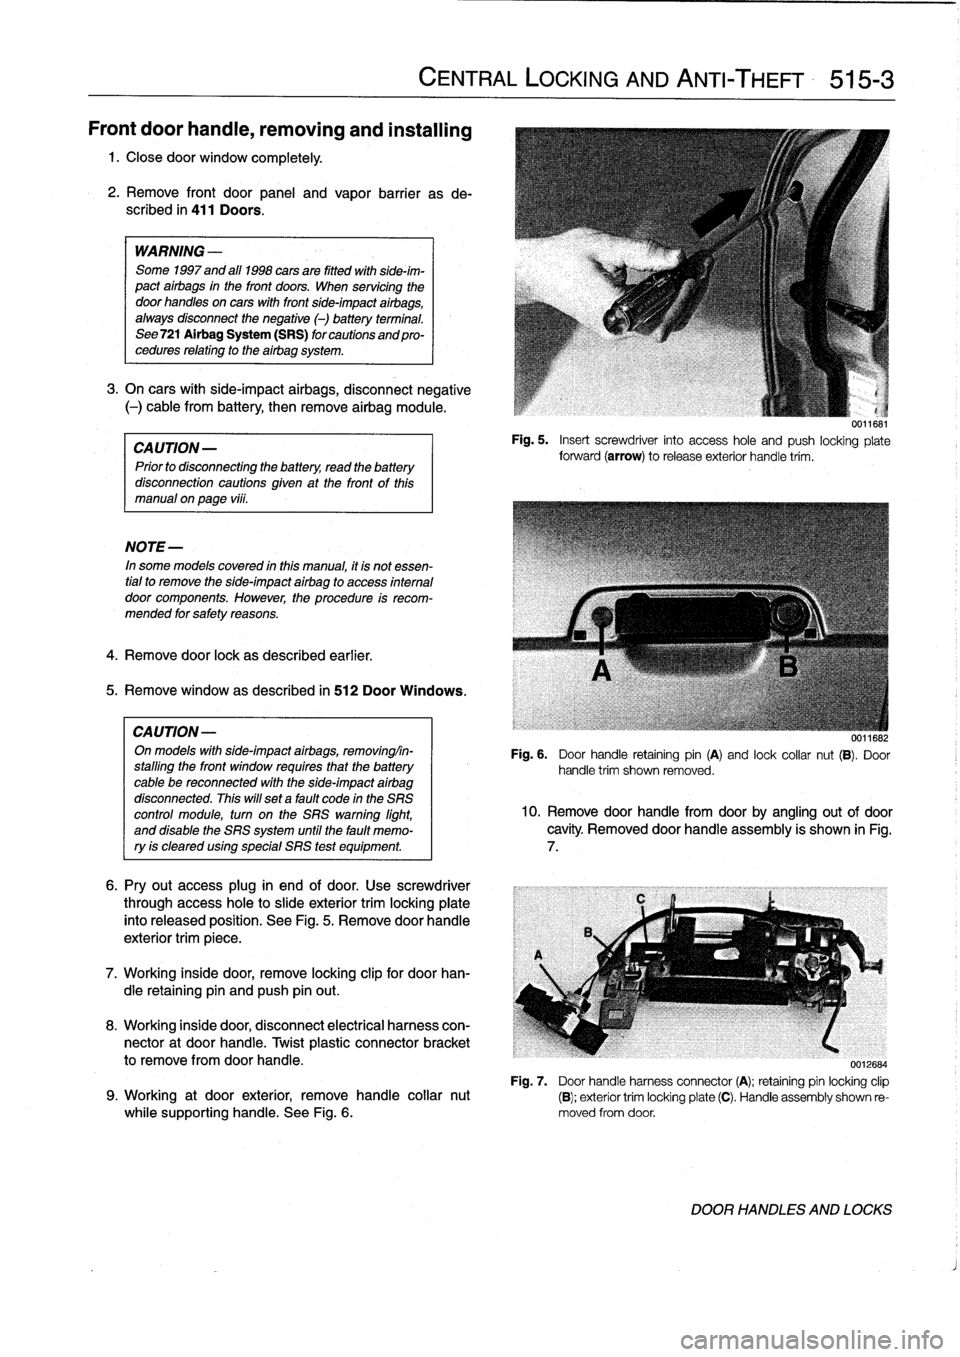 BMW 318i 1997 E36 Owners Manual 
Front
door
handle,
removing
and
installing

1
.
Closedoor
window
completely
.

2
.
Remove
front
door
panel
and
vapor
barrier
asde-
scribed
in
411
Doors
.

WARNING
-

Some
1997
and
al]
1998
cars
are
f